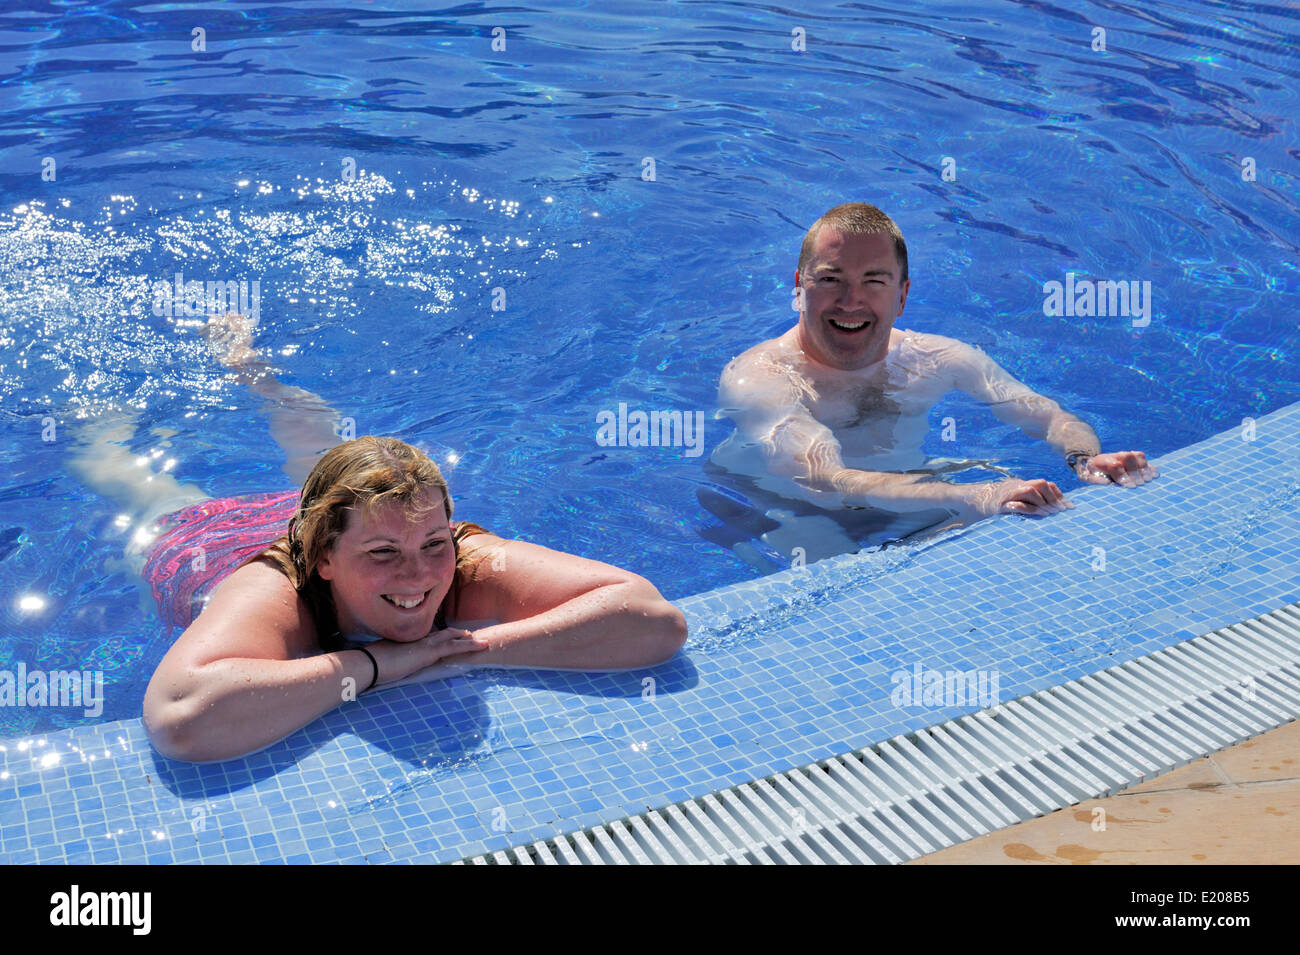 Two people in water by edge of swimming pool Stock Photo